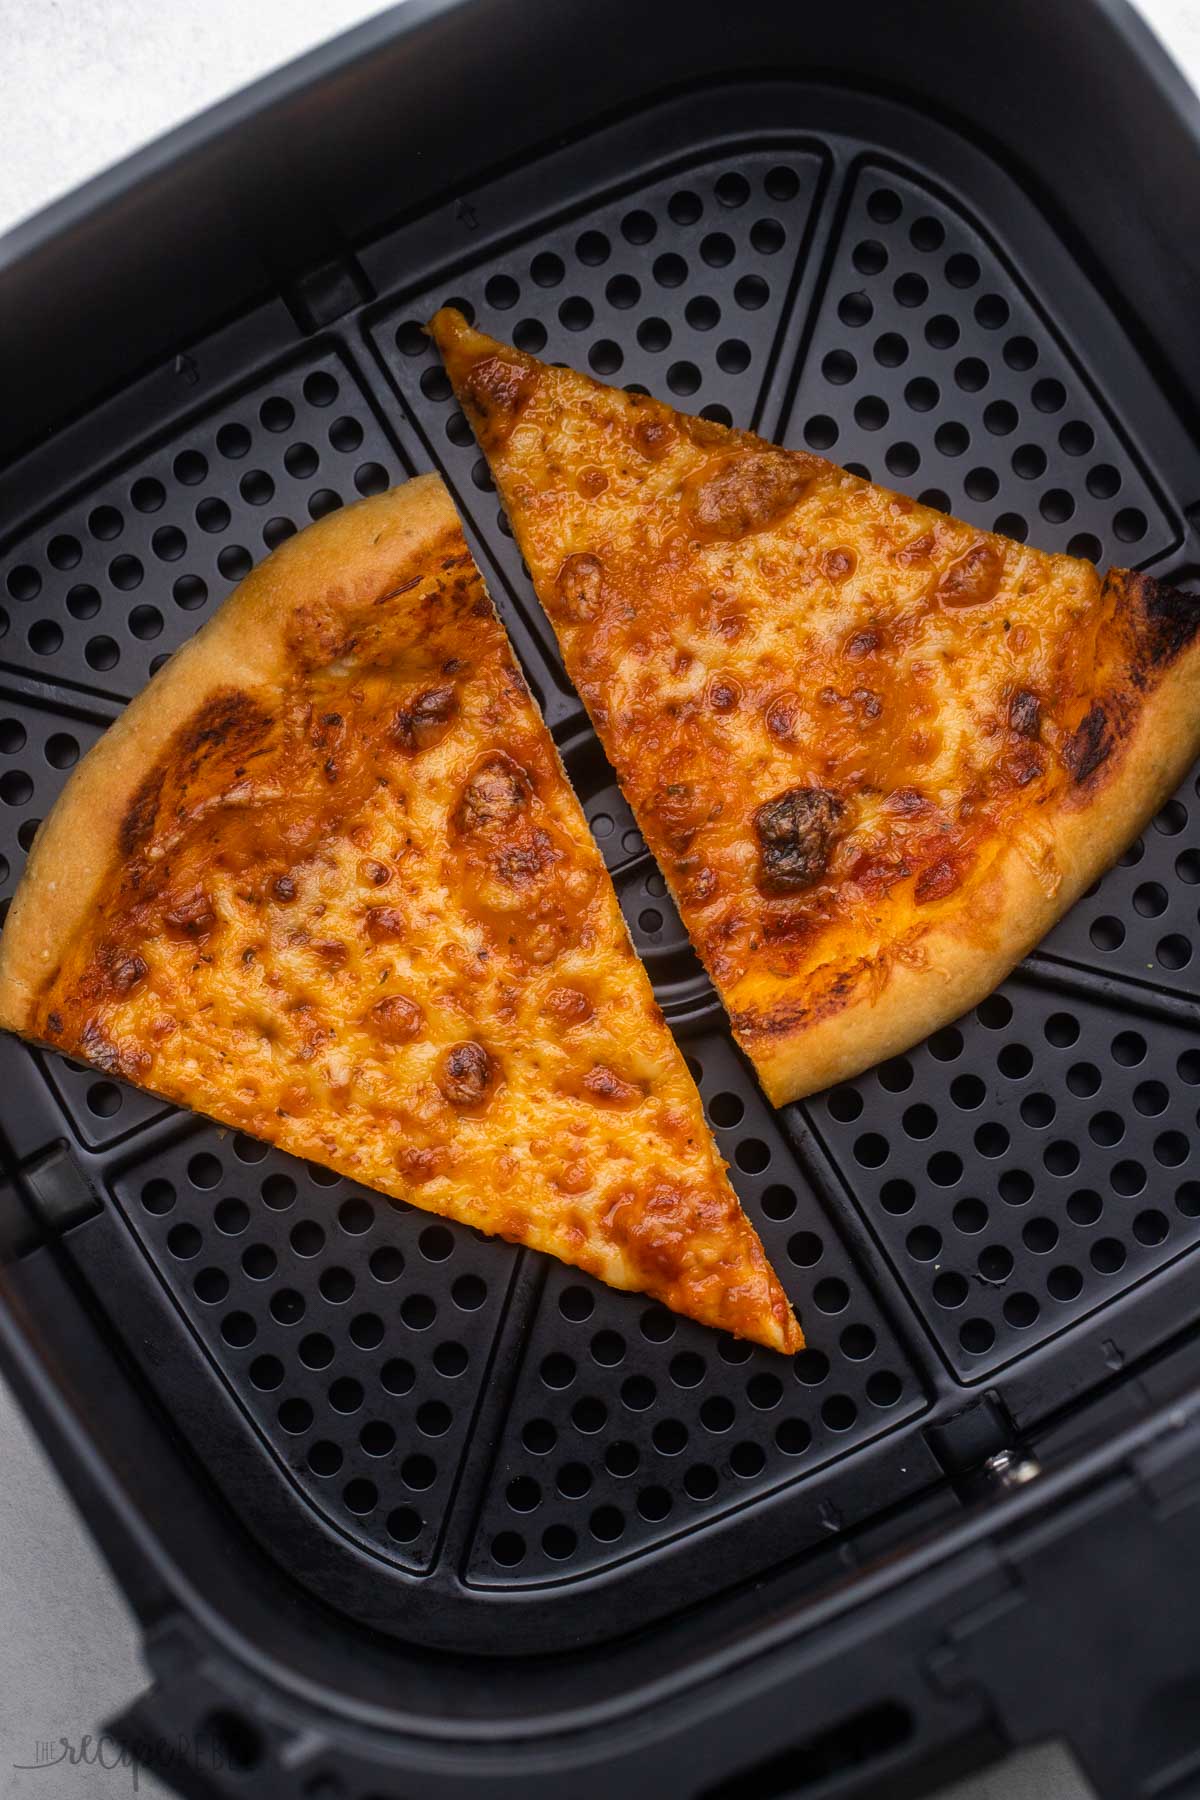 two slices of cheese pizza in air fryer basket.